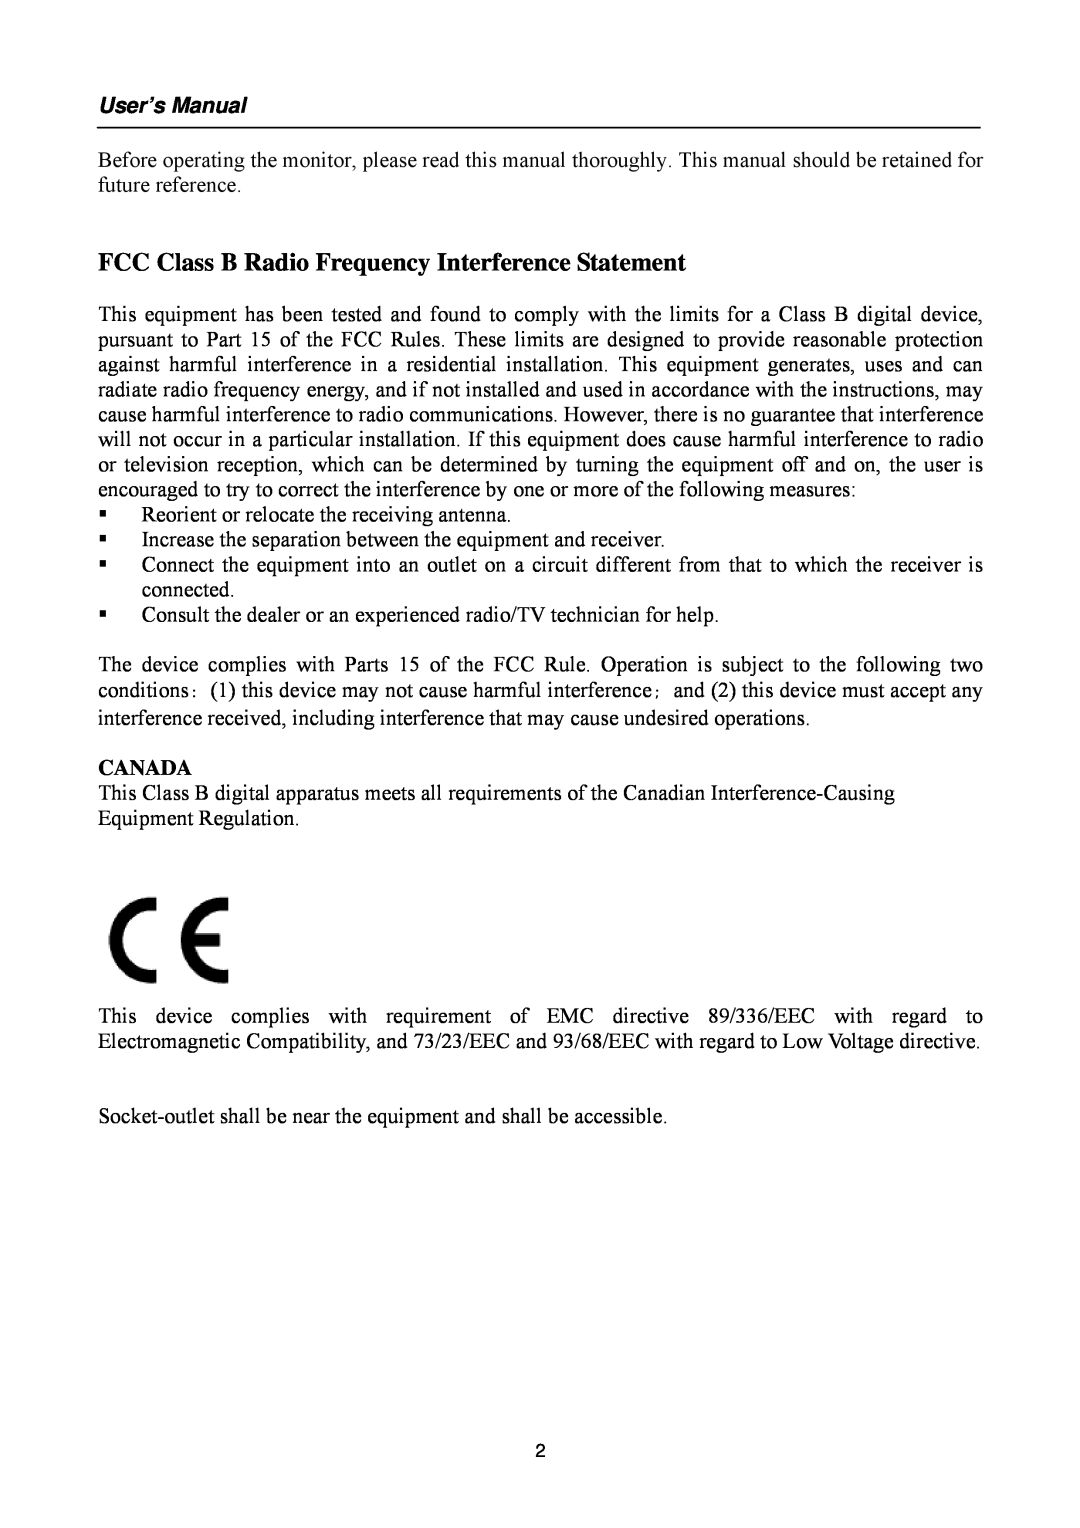 Hanns.G HG281 manual FCC Class B Radio Frequency Interference Statement, User’s Manual 